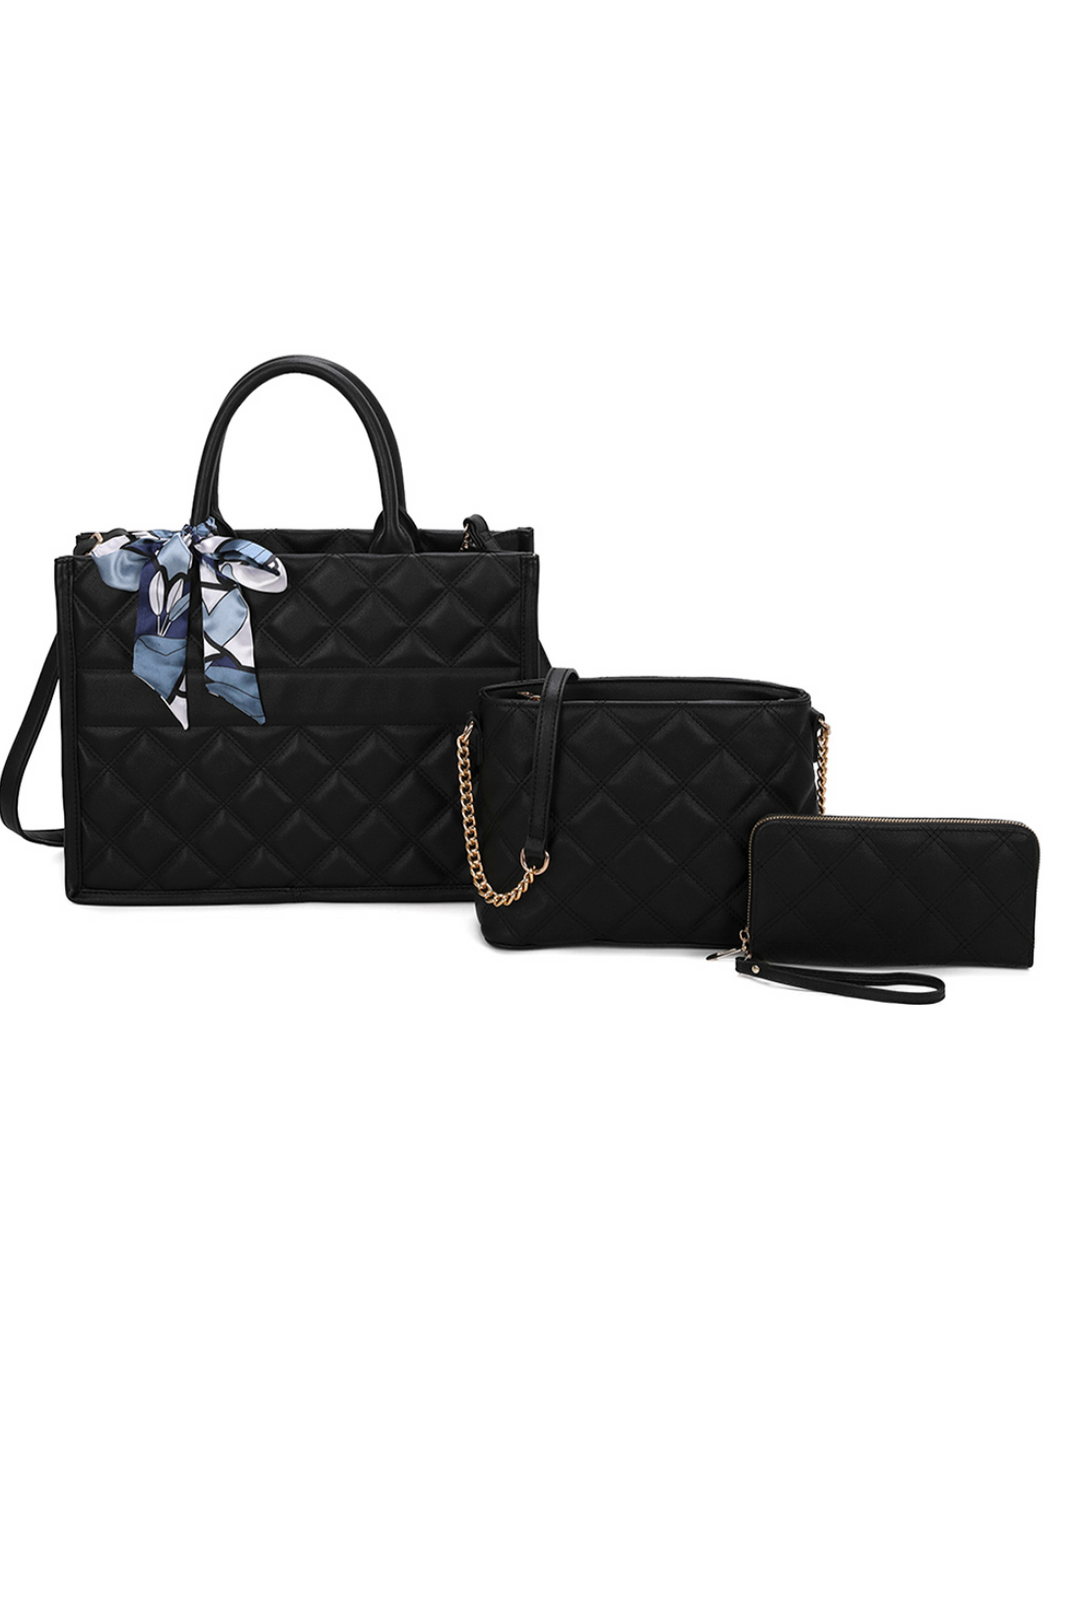 Out And About Purse Set In Black - ShopSpoiled